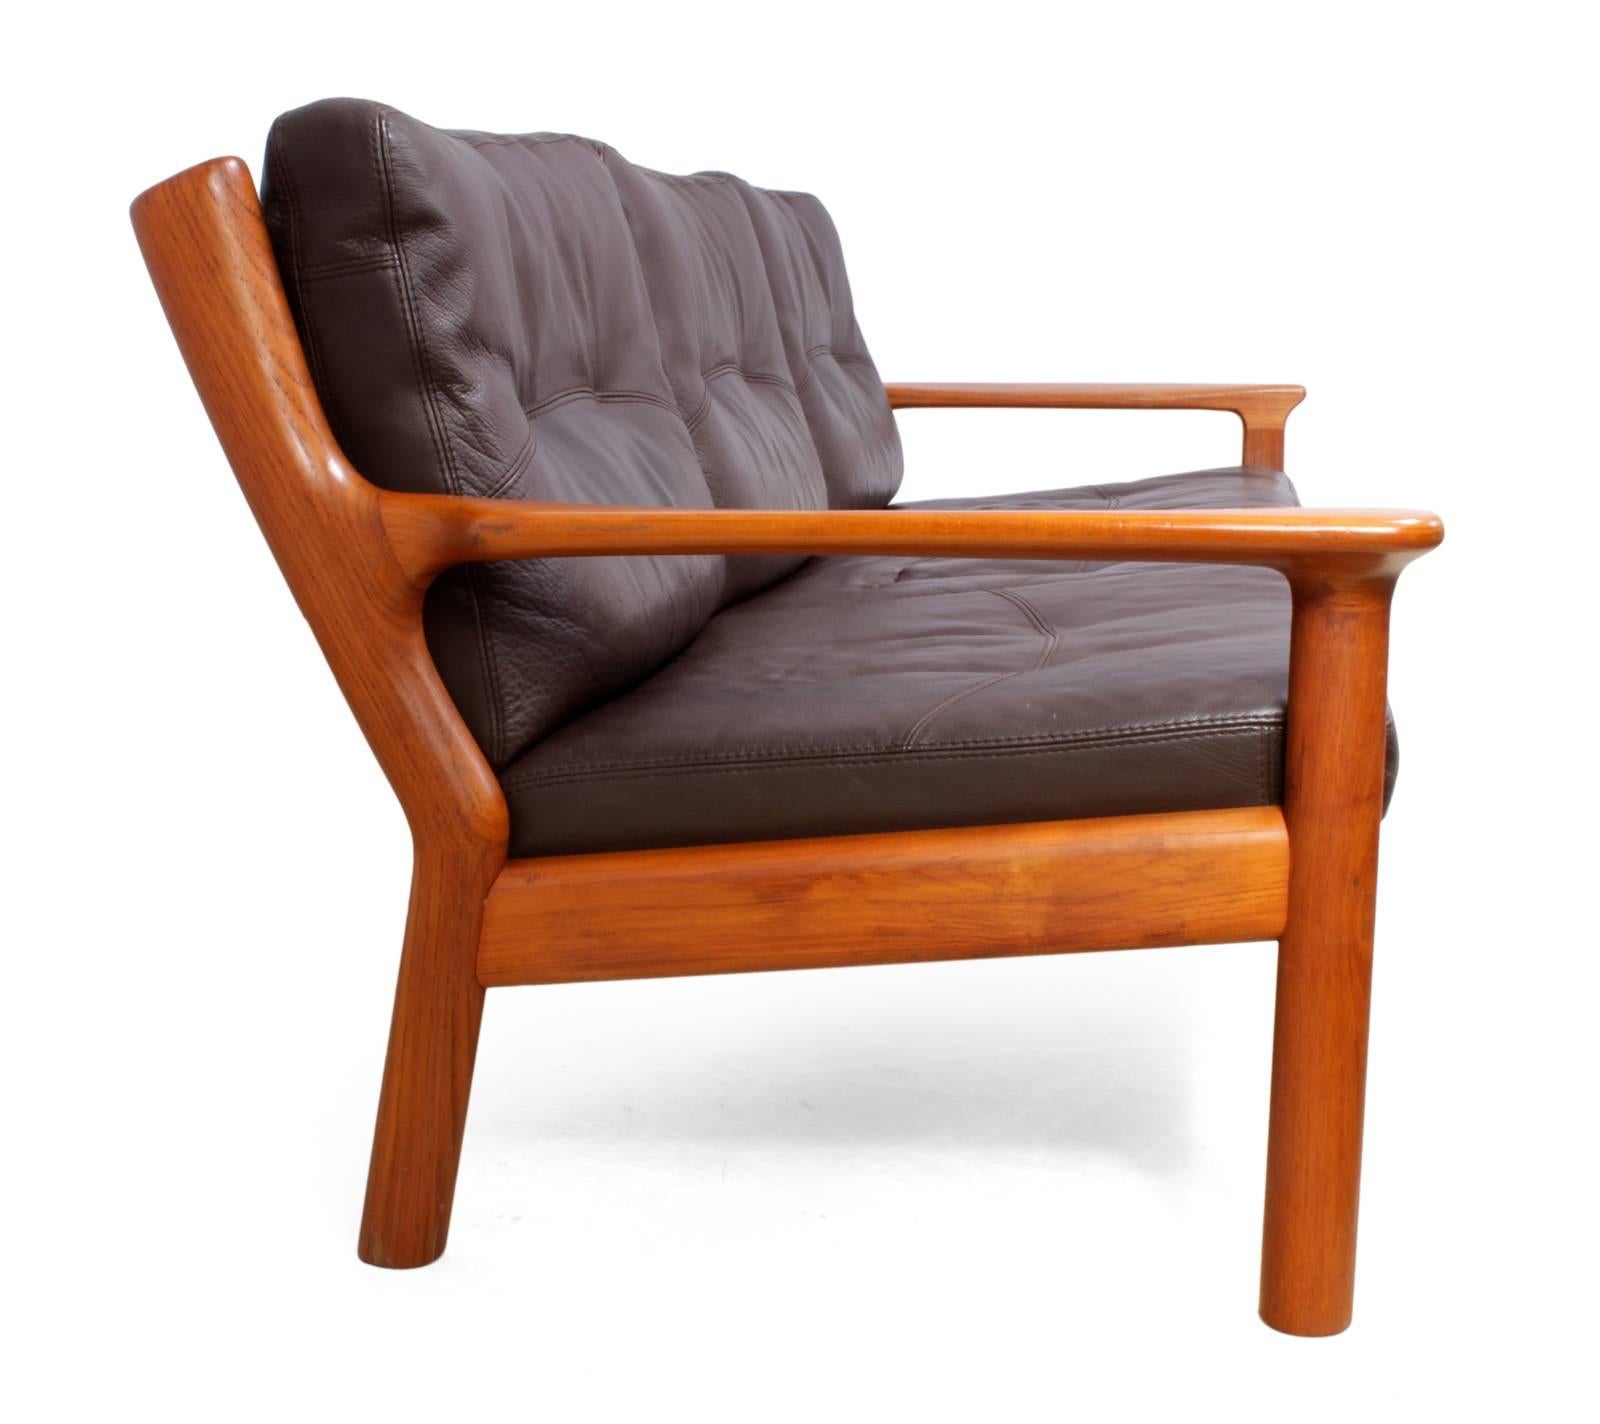 Midcentury Sofa in Teak and Leather by Glostrop 3